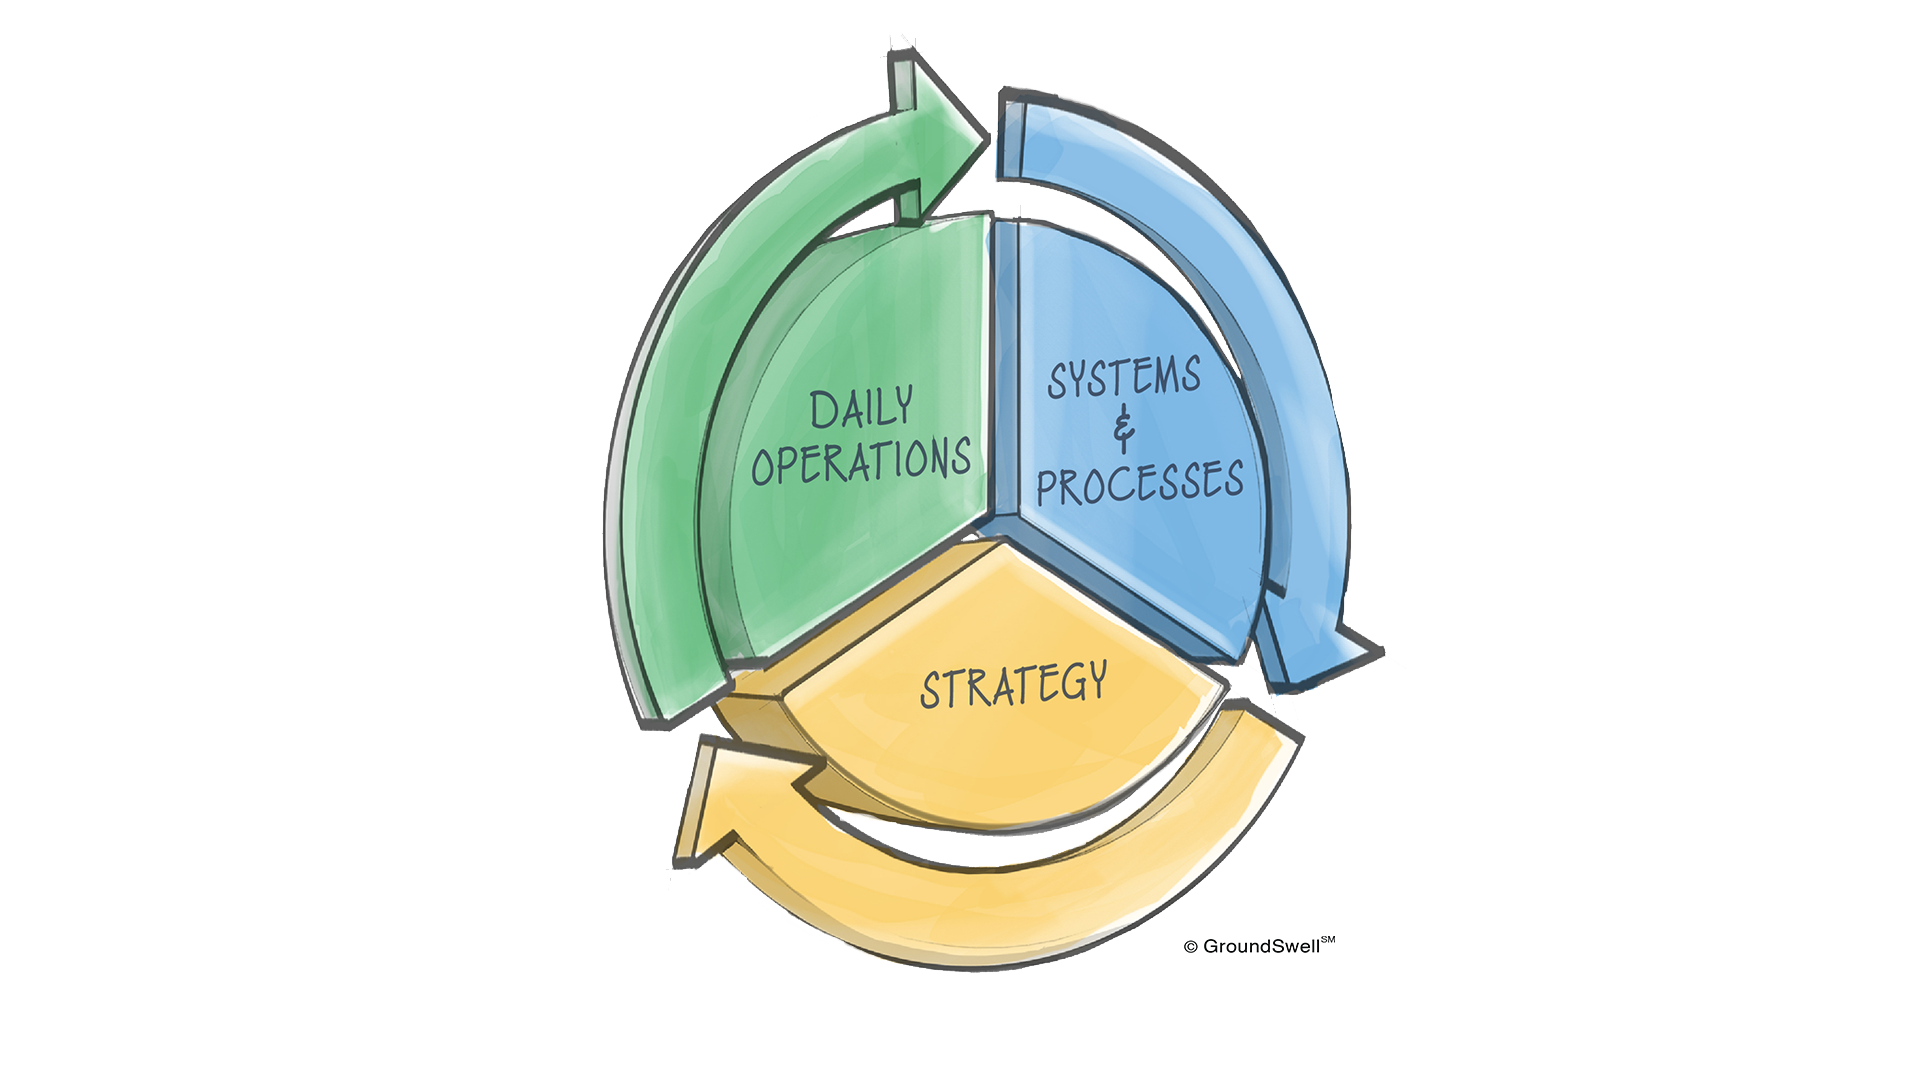 A depiction of the three components of a leadership team including day-to-day operations, systems and processes, and strategy